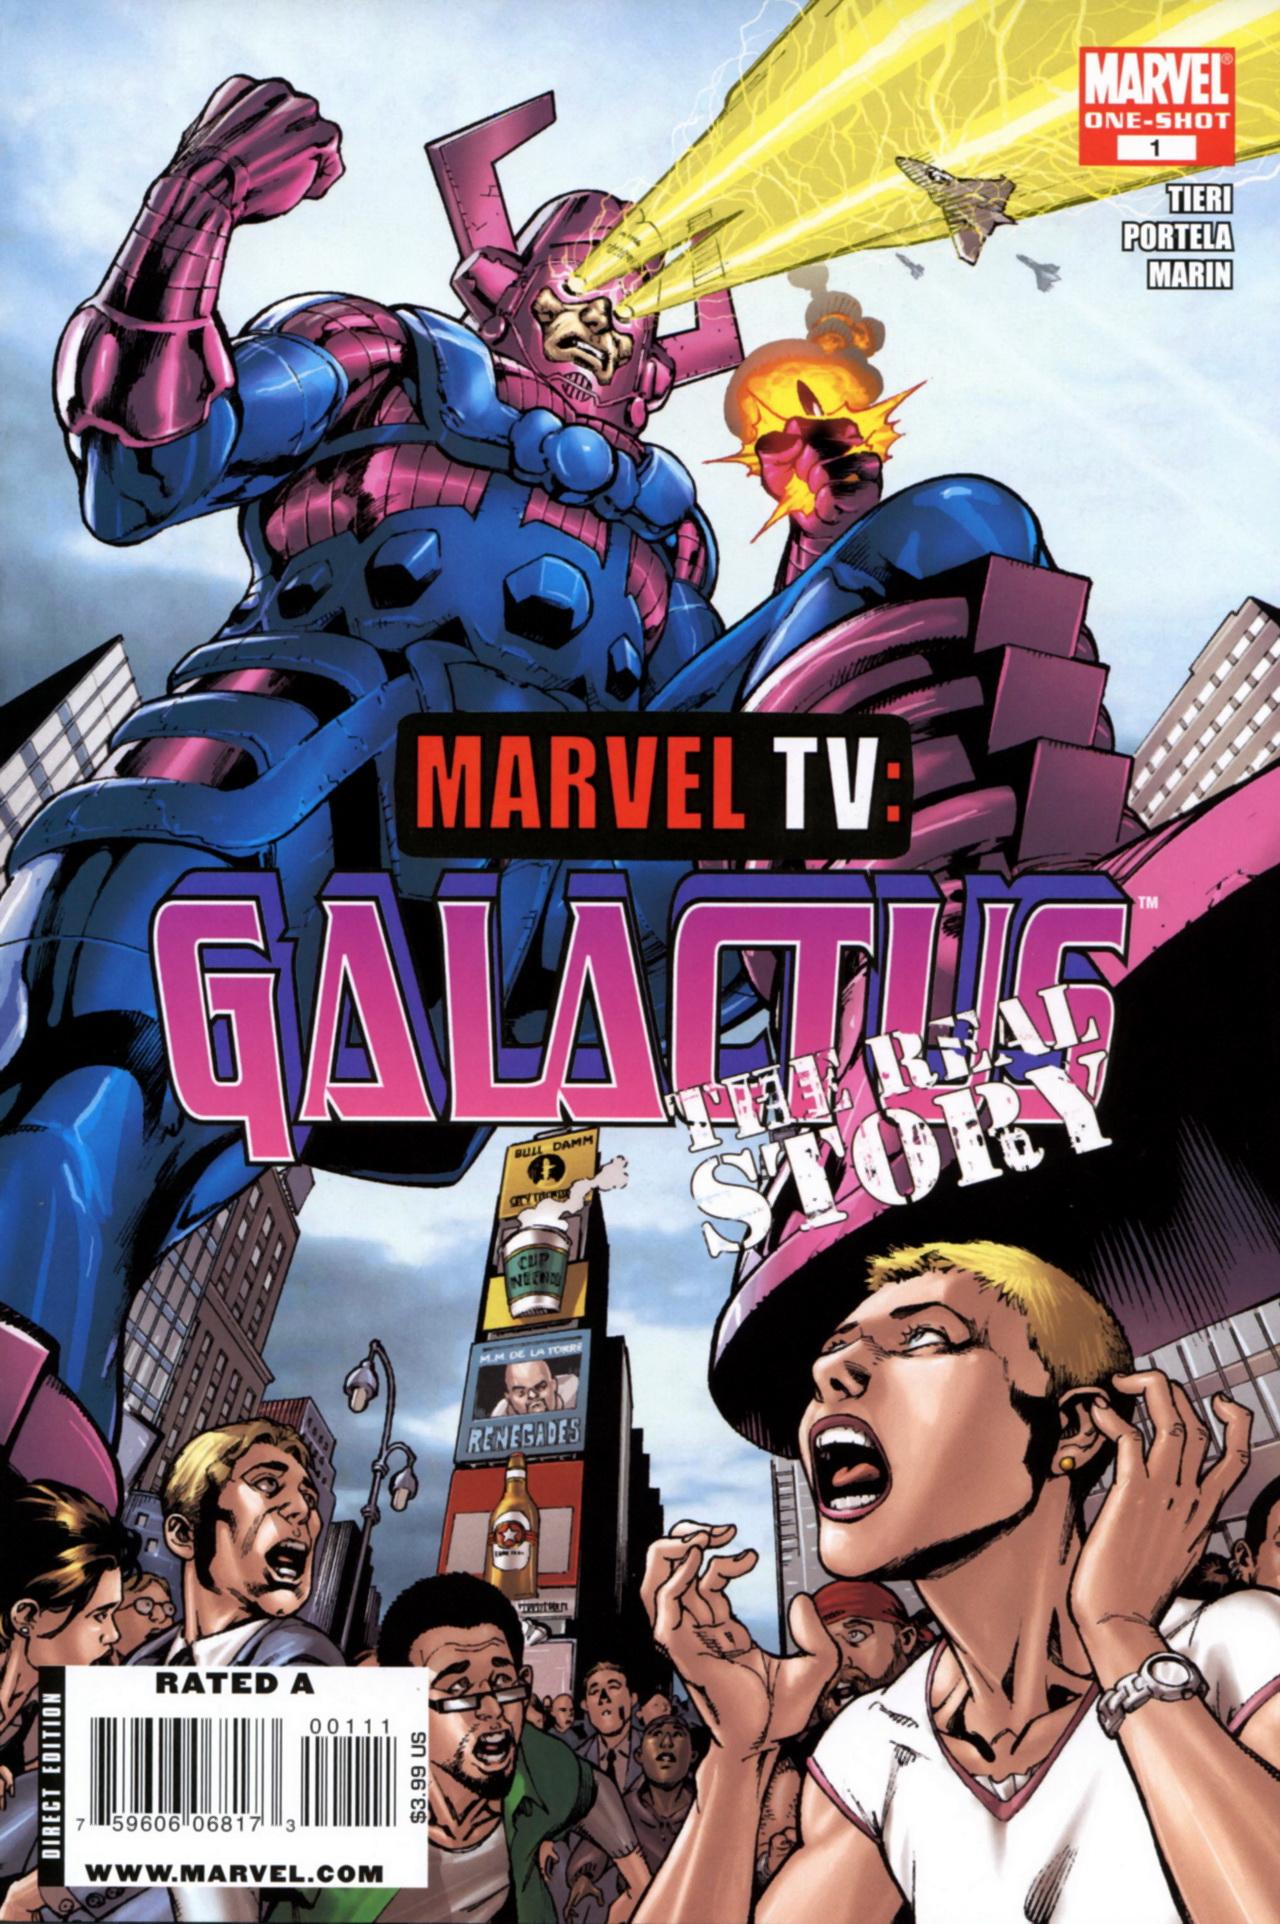 Marvel TV: Galactus - The Real Story Vol. 1 #1